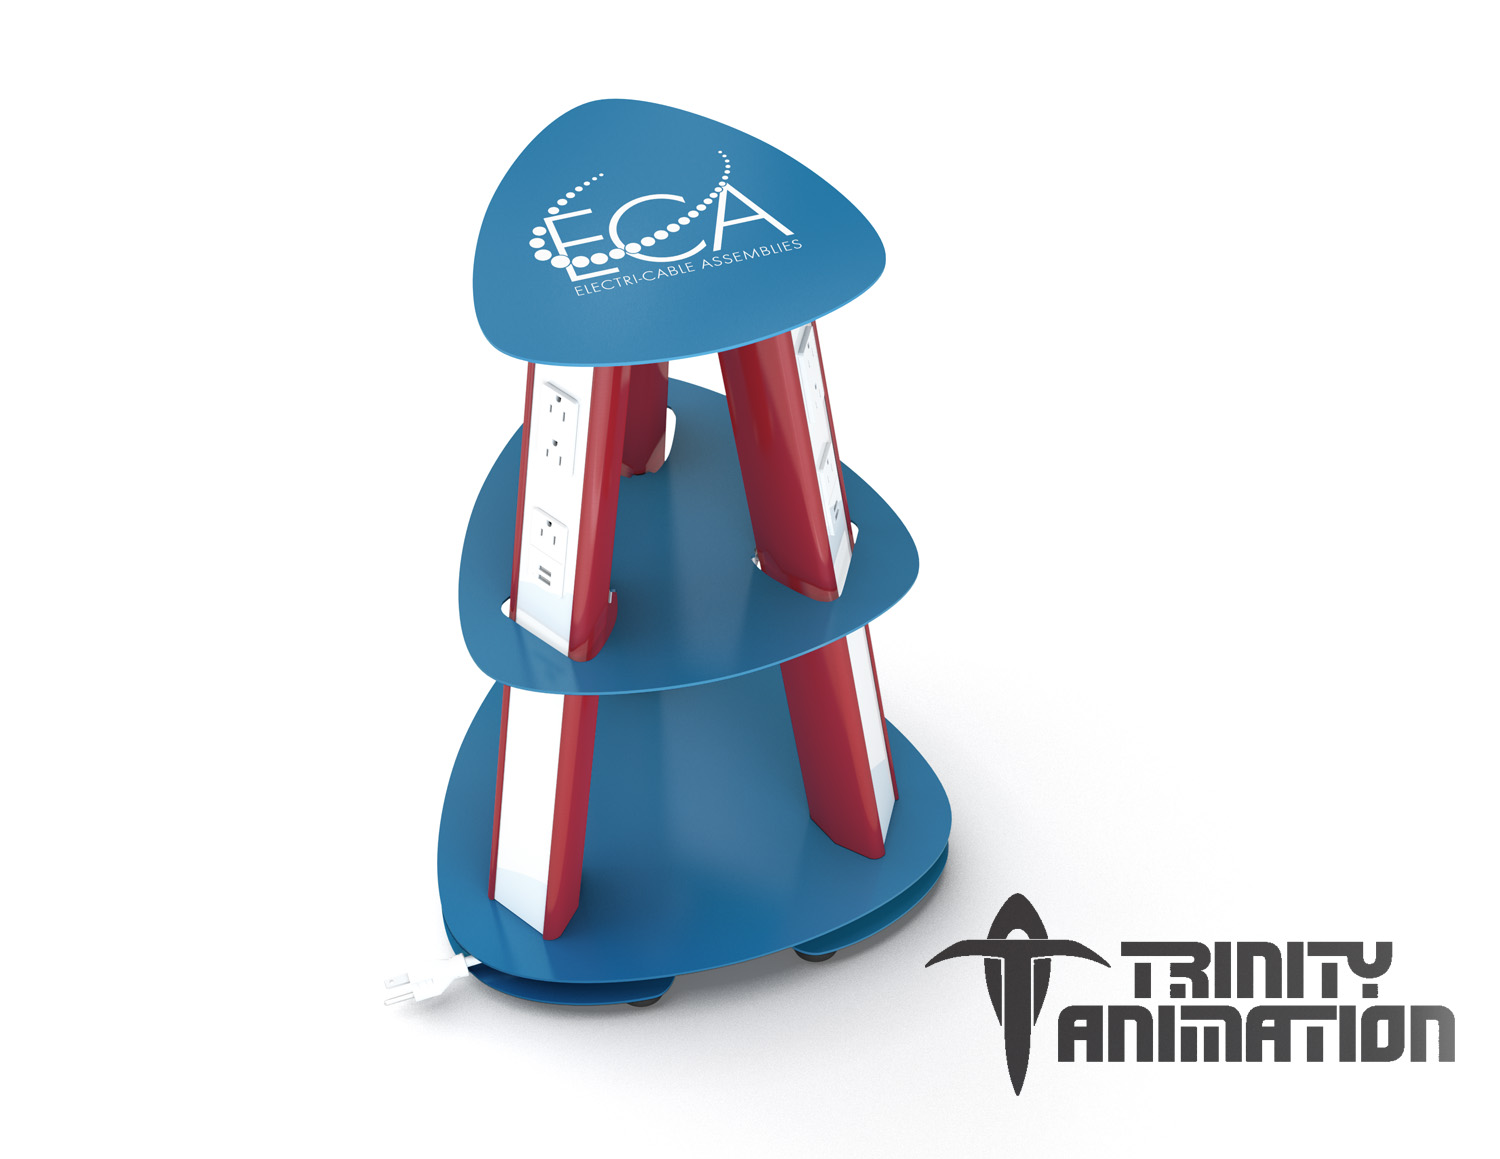 Product rendering of red, white and blue themed ECA Isle power base by Trinity Animation.